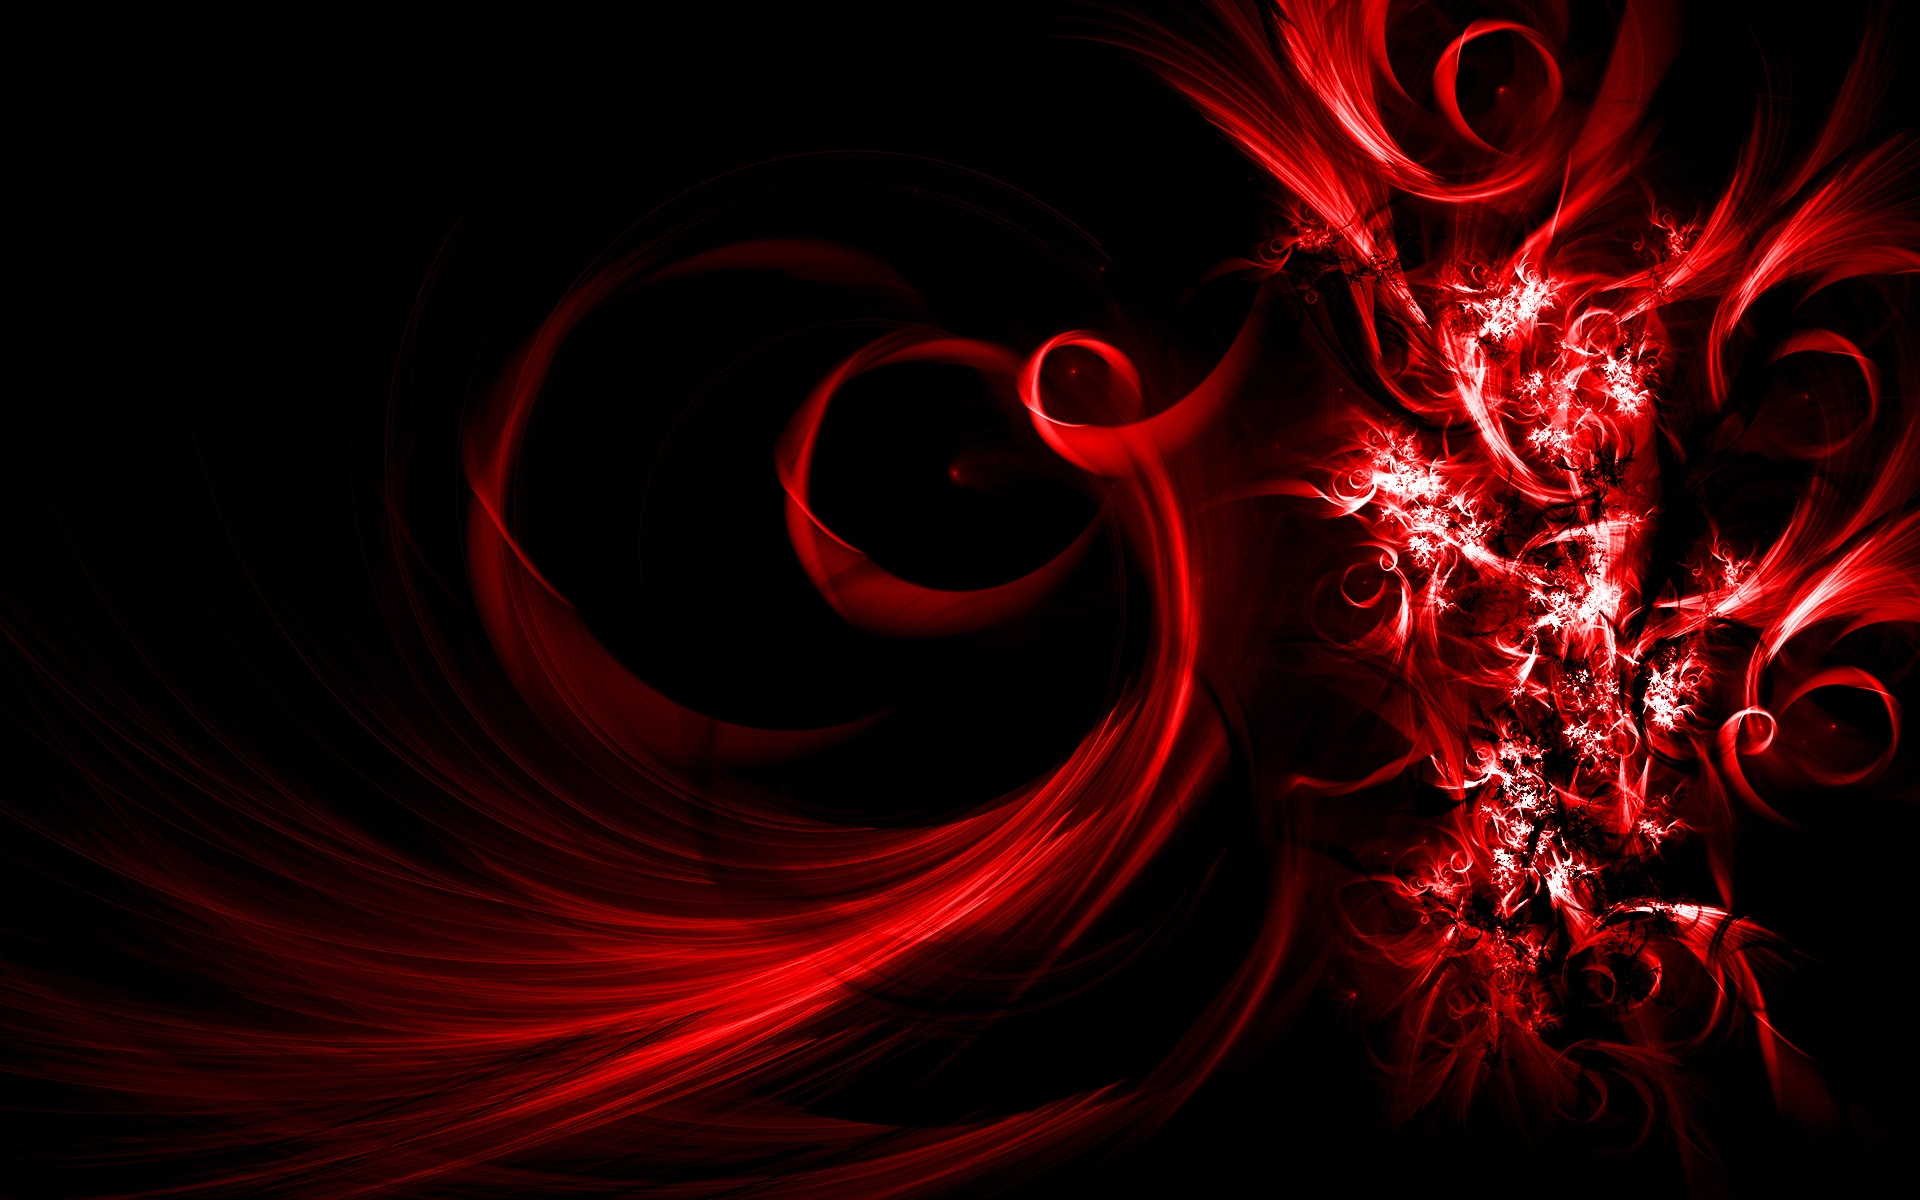 Red Wallpaper Desktop Share This Awesome